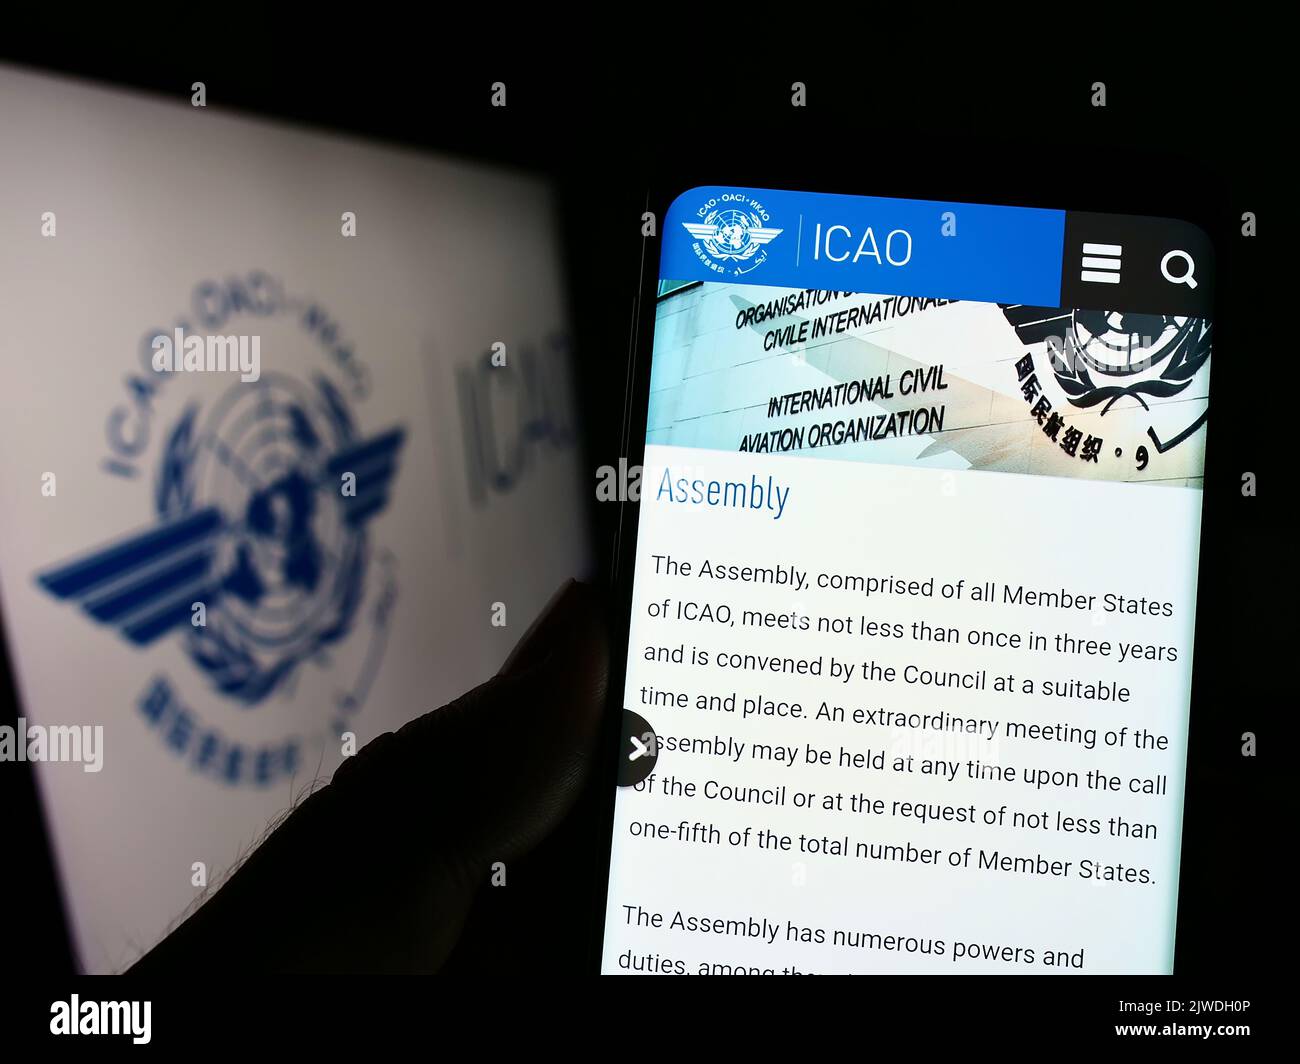 Person holding cellphone with website of International Civil Aviation Organization (ICAO) on screen with logo. Focus on center of phone display. Stock Photo